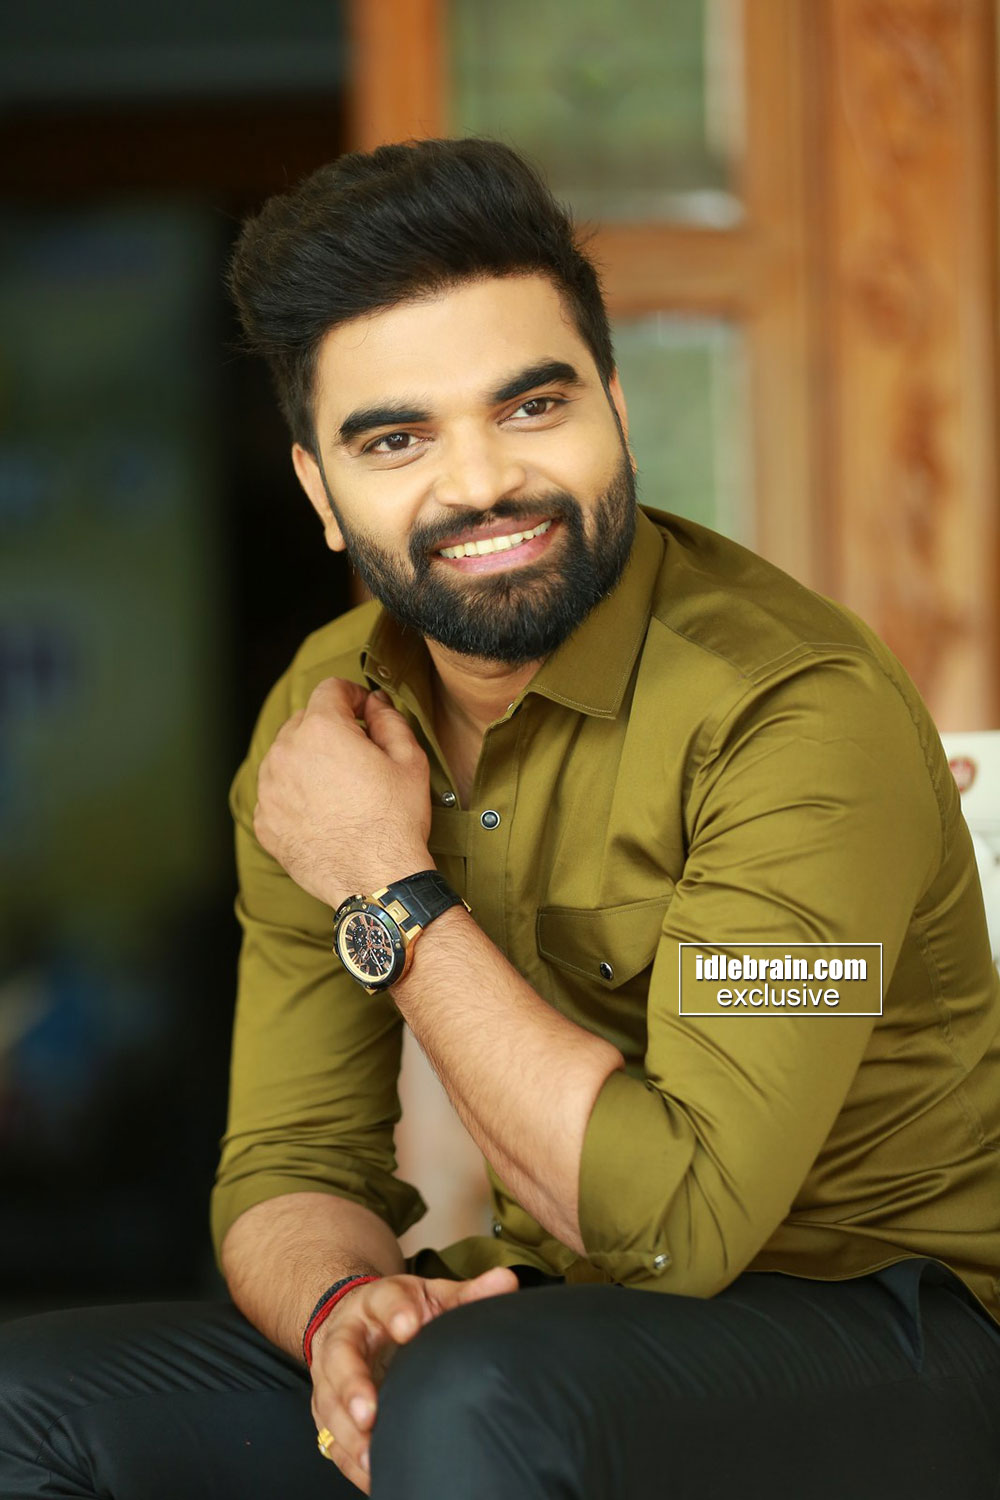 Exclusive - Pradeep Machiraju refutes rumours of engagement with celebrity  stylist Navya Marouthu; here's what he has to say - Times of India